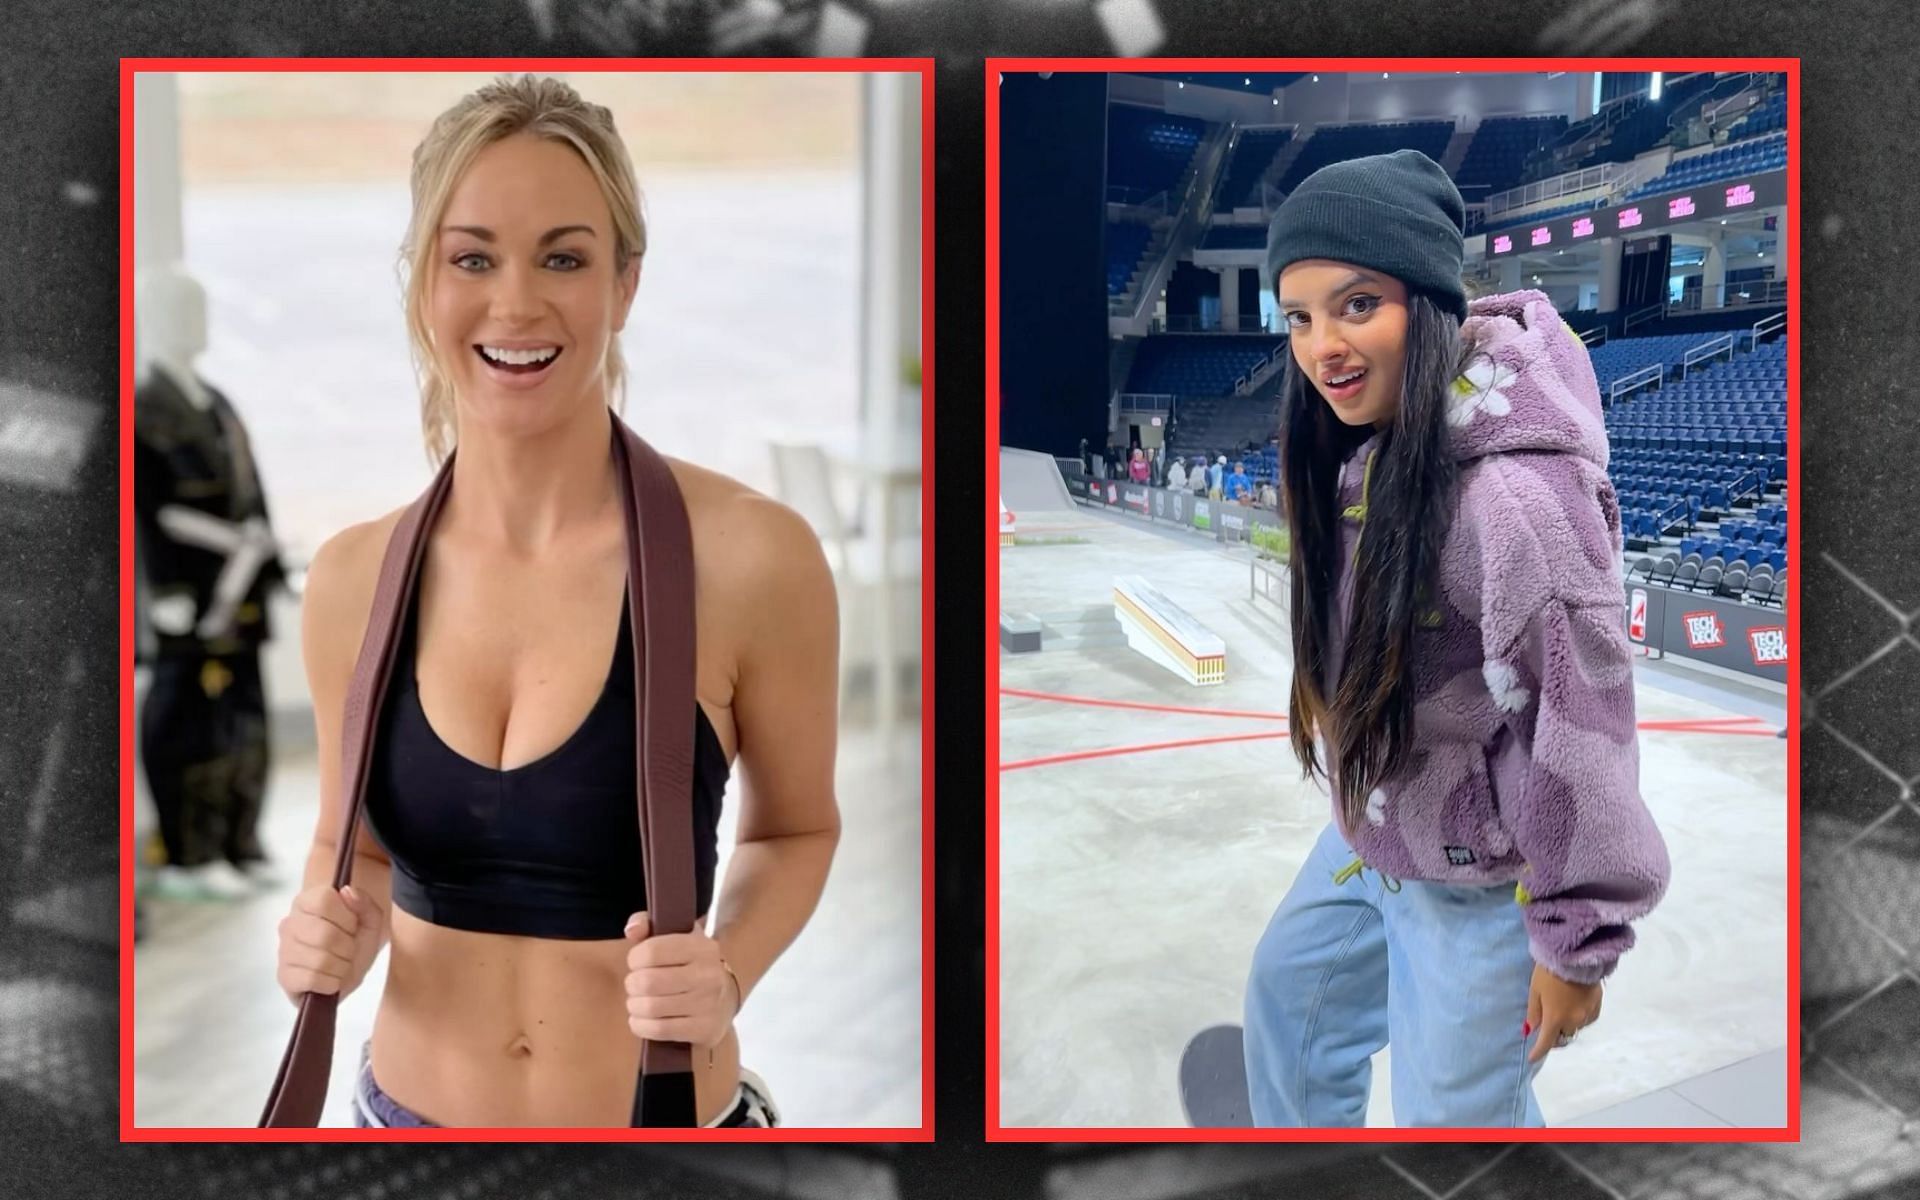 Nina Marie Daniele (right) comments on recent criticism concerning Laura Sanko (left) [Image credits: @ninamariedaniele &amp; @laura_sanko on Instagram]